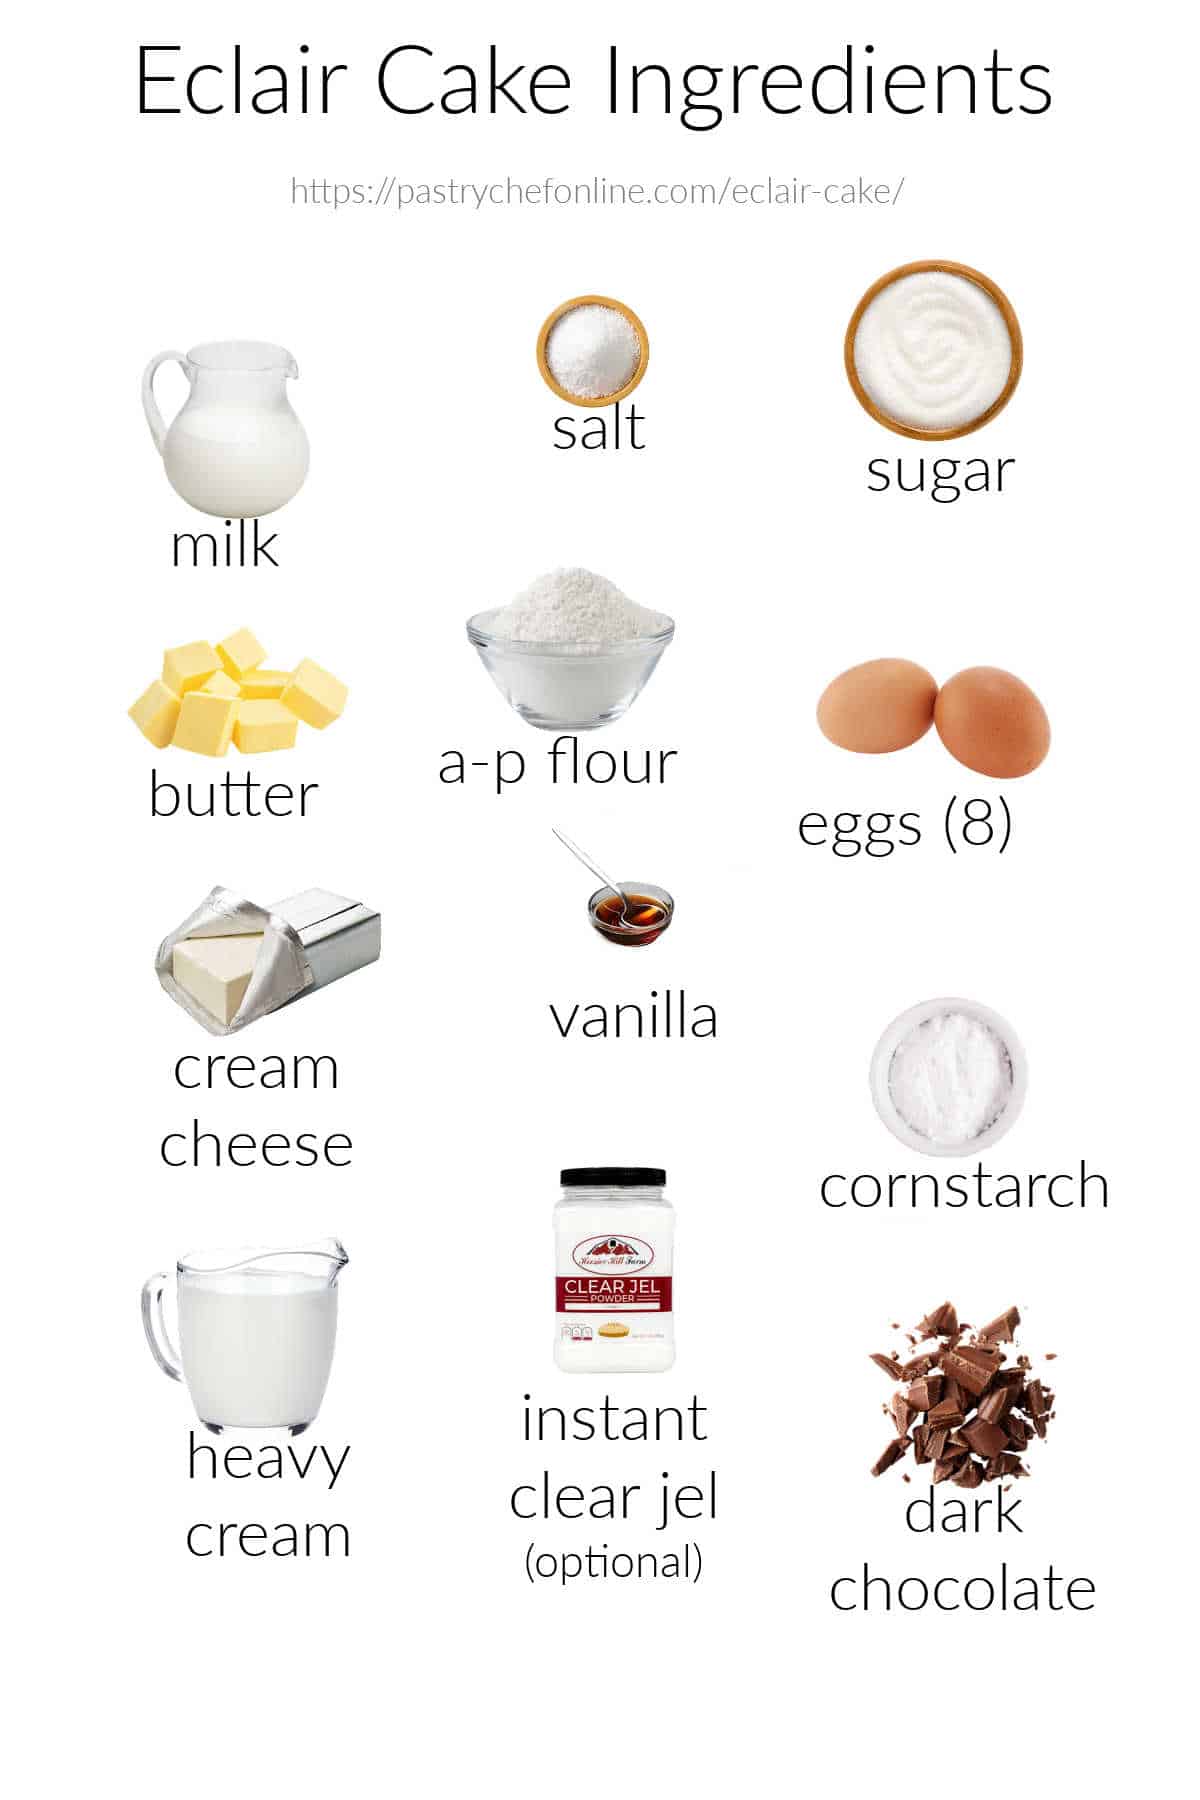 Photos of all the ingredients needed to make eclair cake, labeled in black print on a white background.